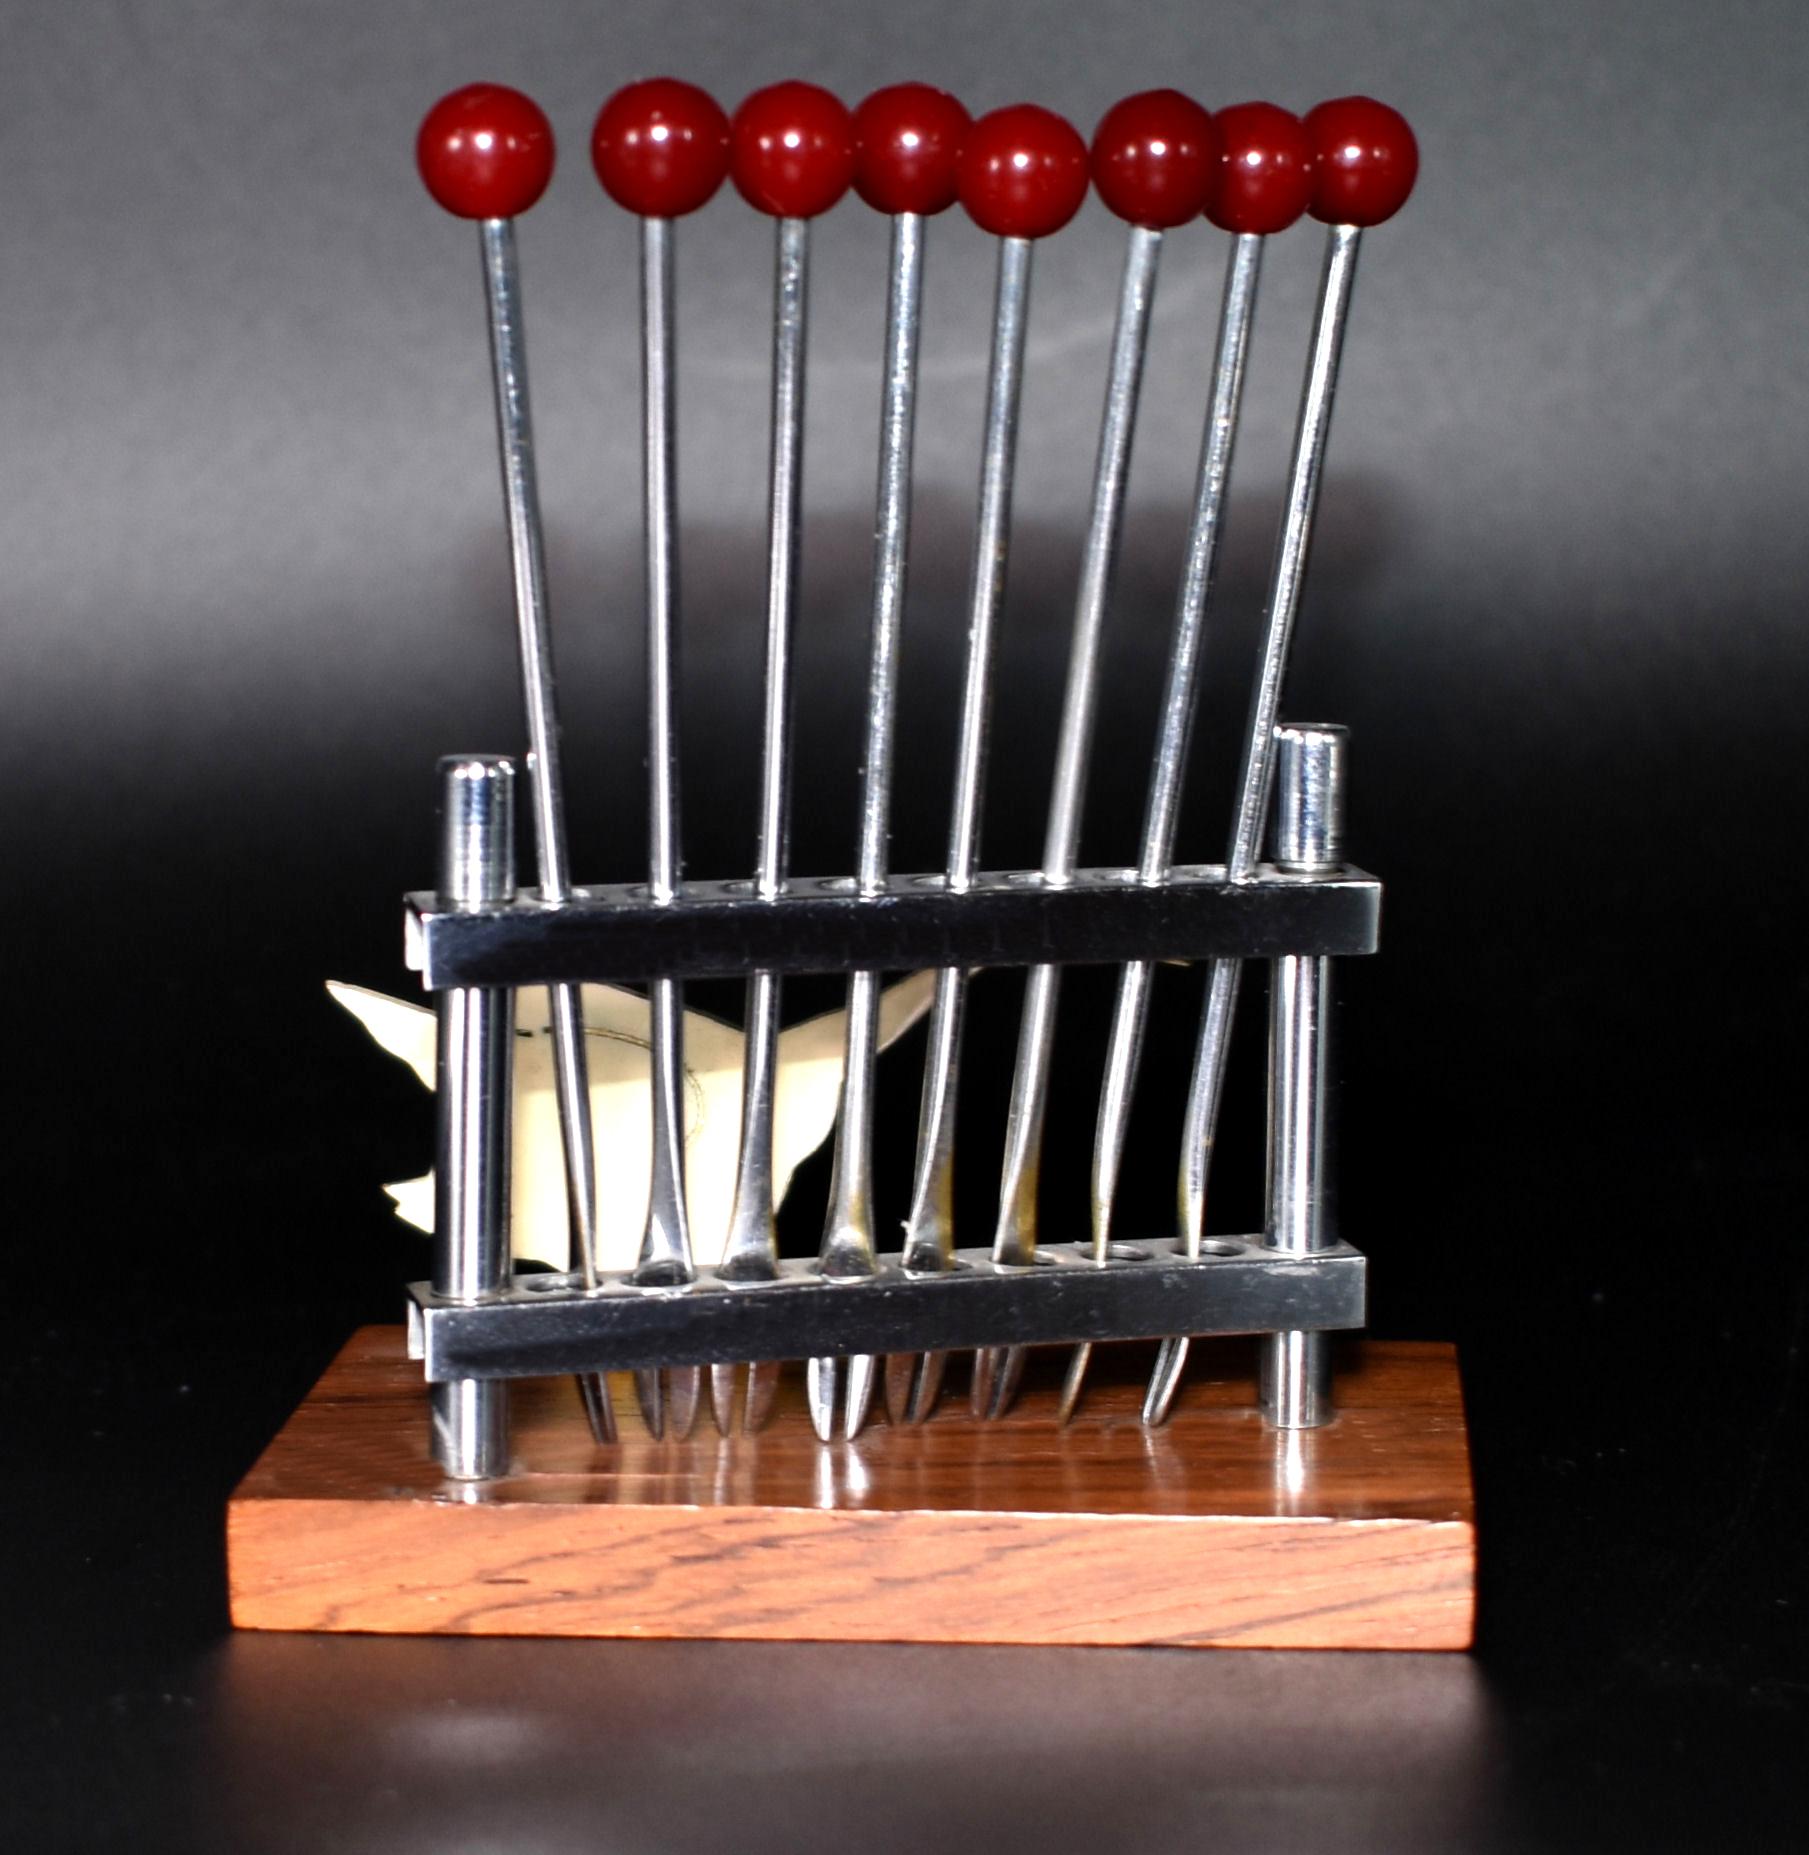 20th Century Art Deco Novelty Cocktail Stick Set in Bakelite and Chrome, circa 1930 For Sale